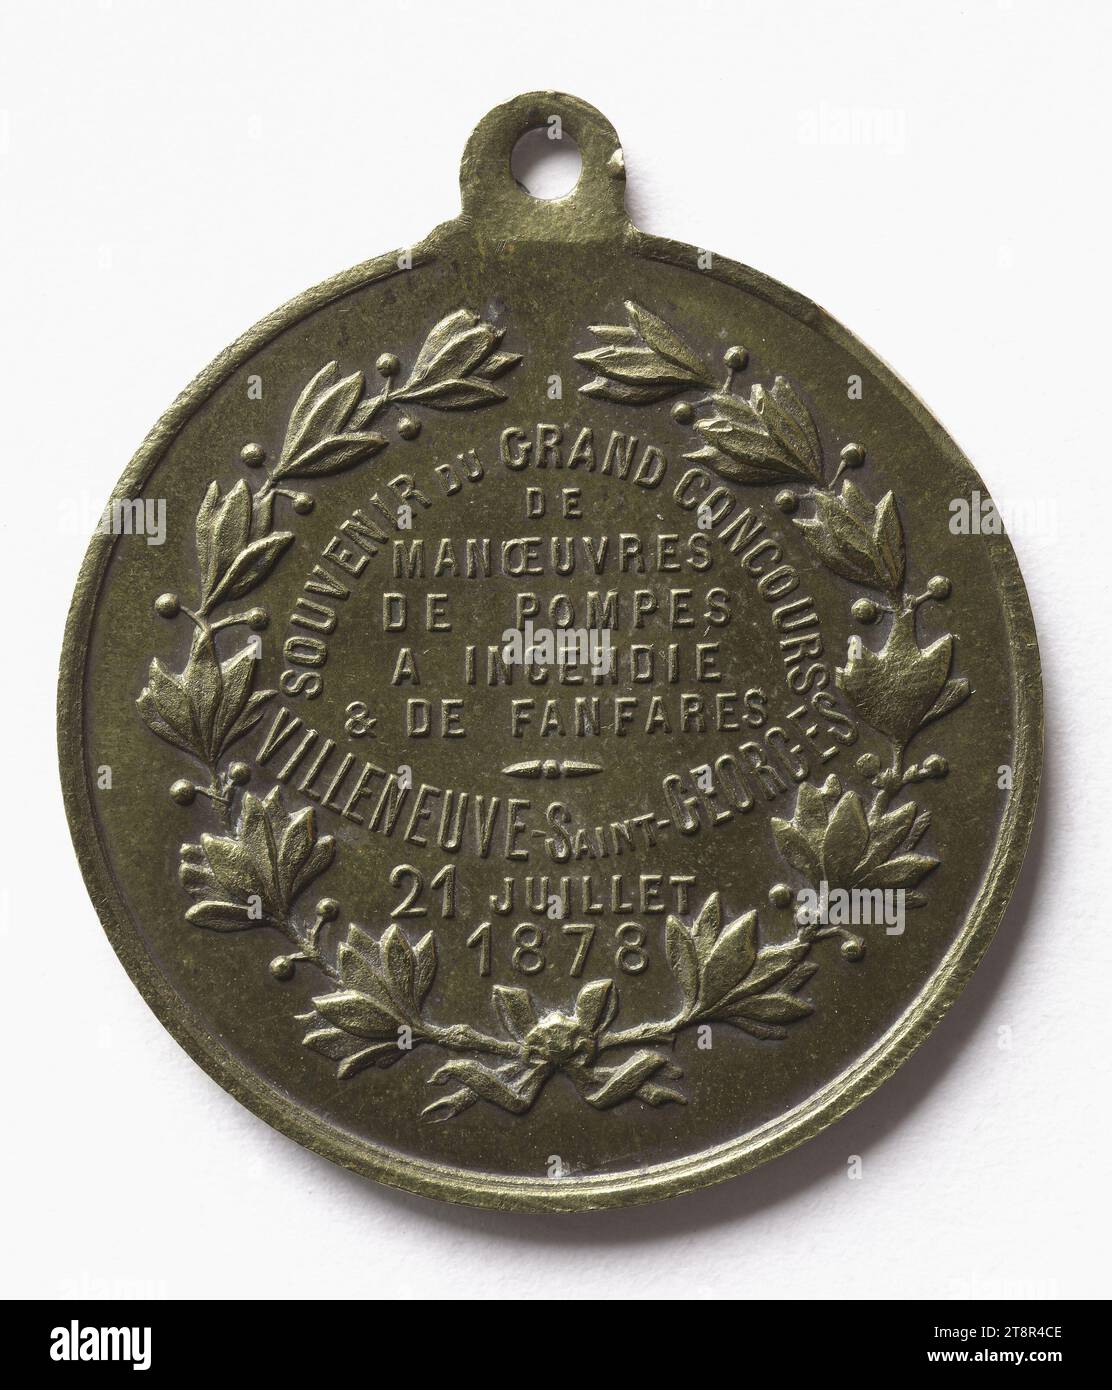 Souvenir of the great contest of maneuvers of fire pumps and brass bands in Villeneuve-Saint-Georges, July 21, 1878, In 1878, Numismatic, Medal, Copper, Silver plated = silver plating, Sizes - Work: Diameter: 3.2 cm, Weight (type size): 8.37 g Stock Photo